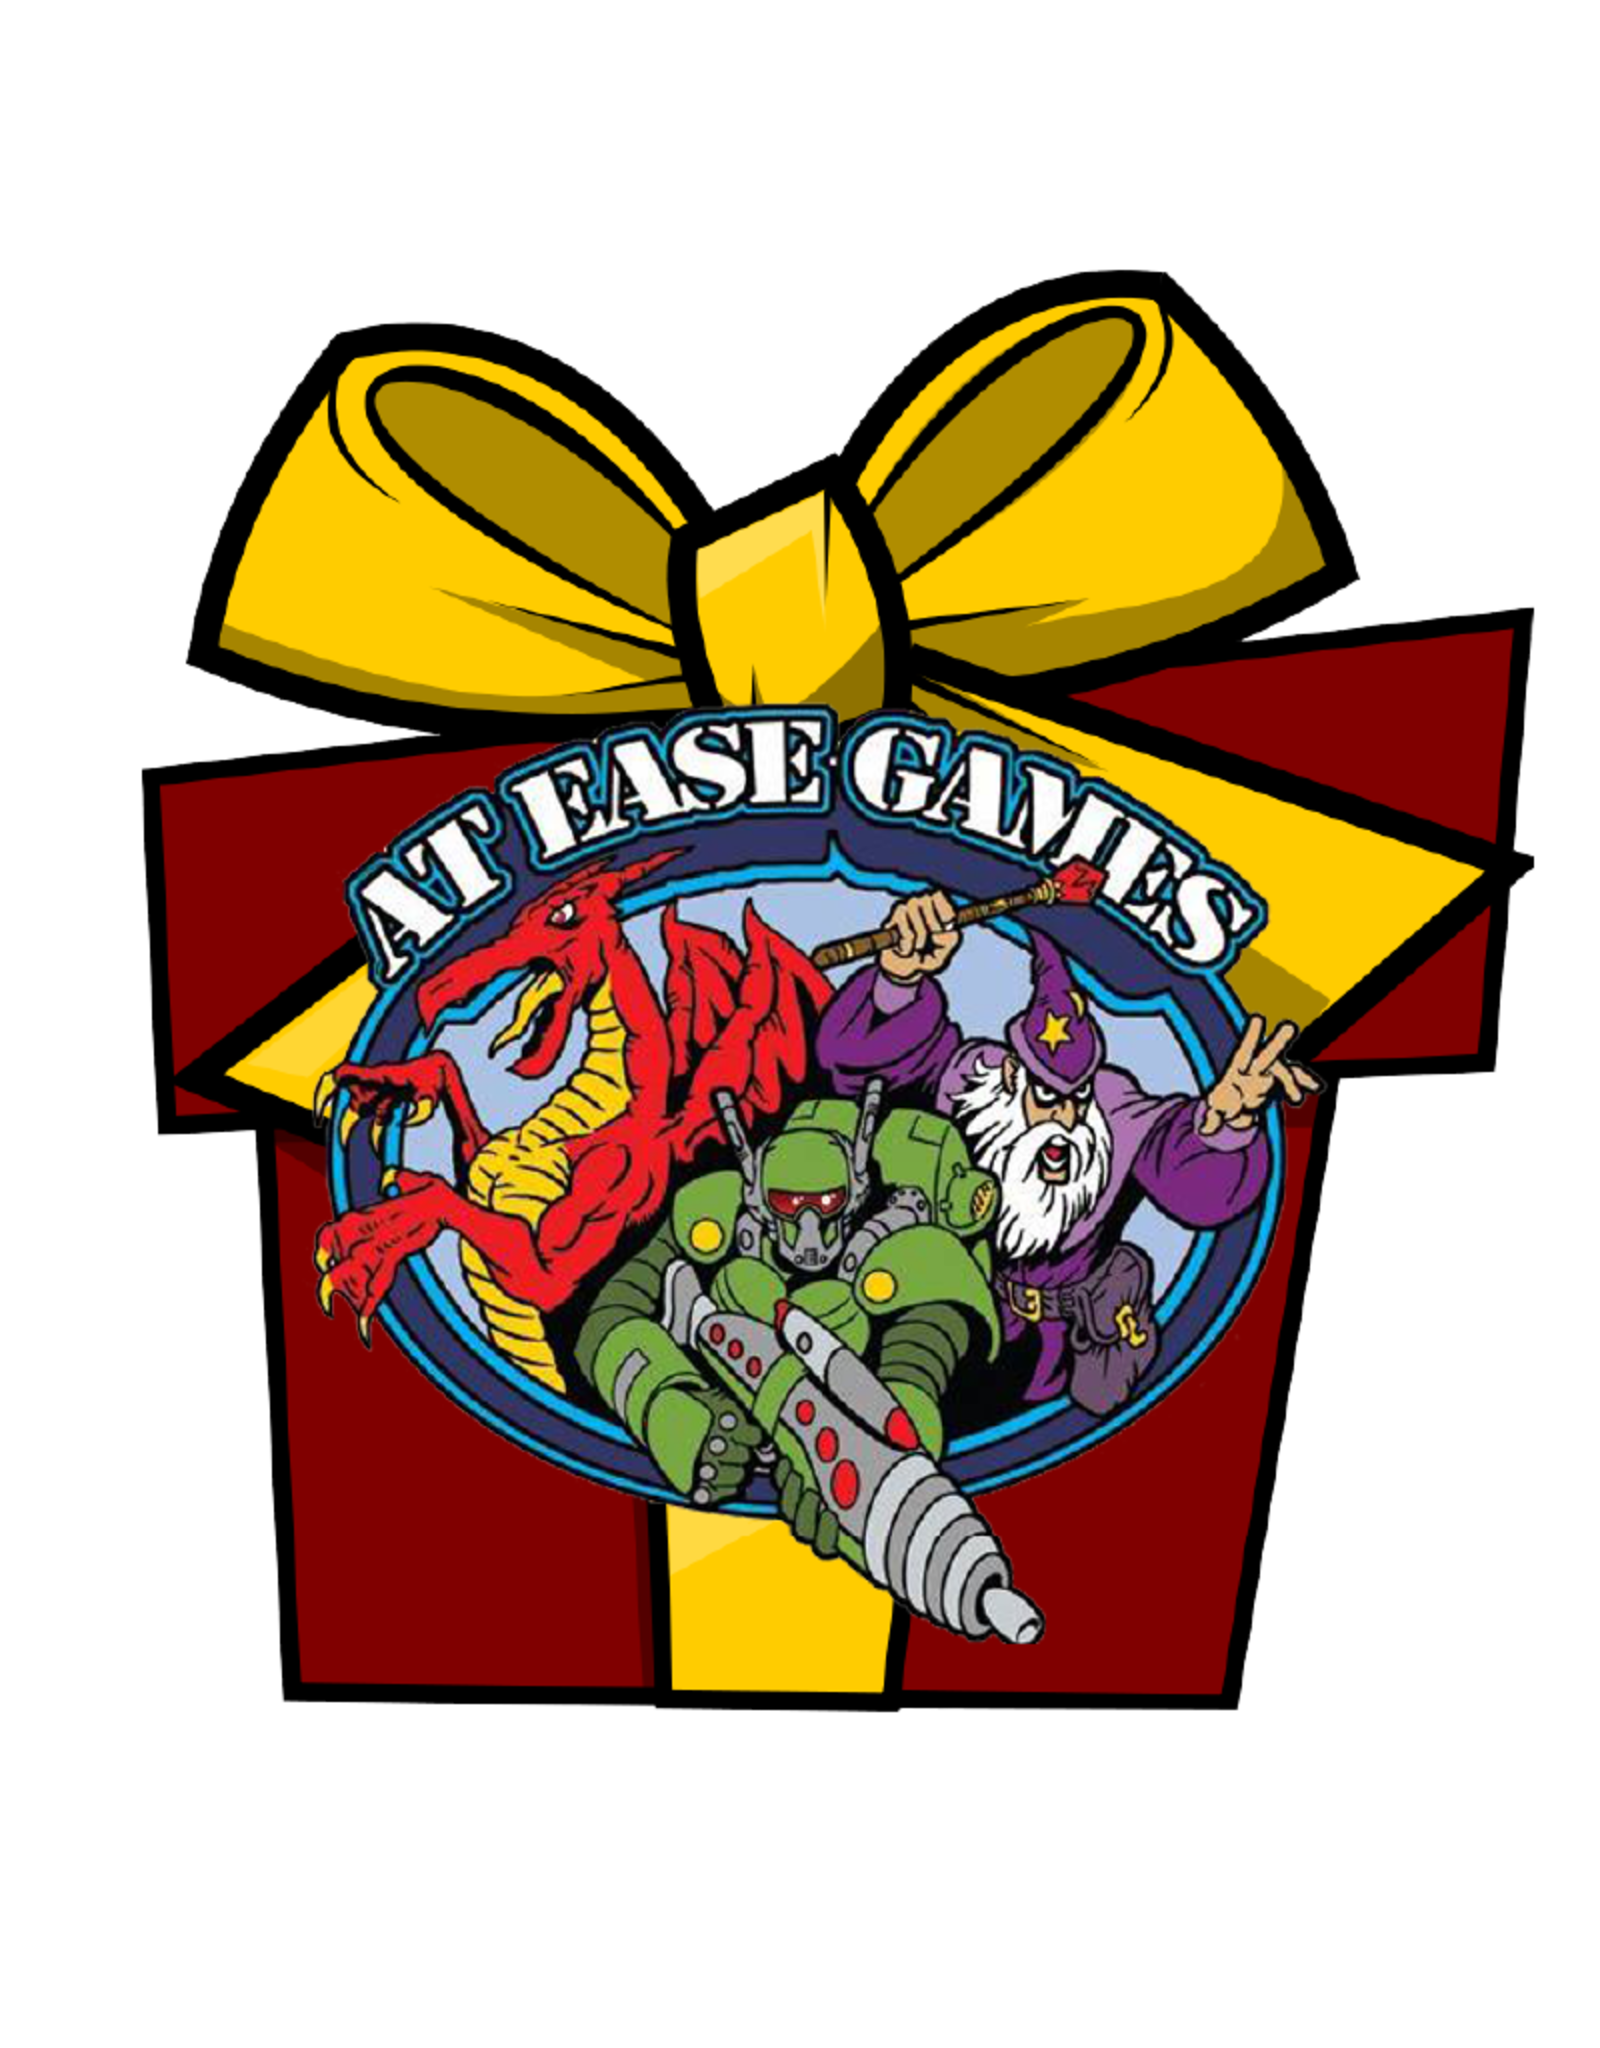 AT EASE GAMES $10 GIFT CERTIFICATES